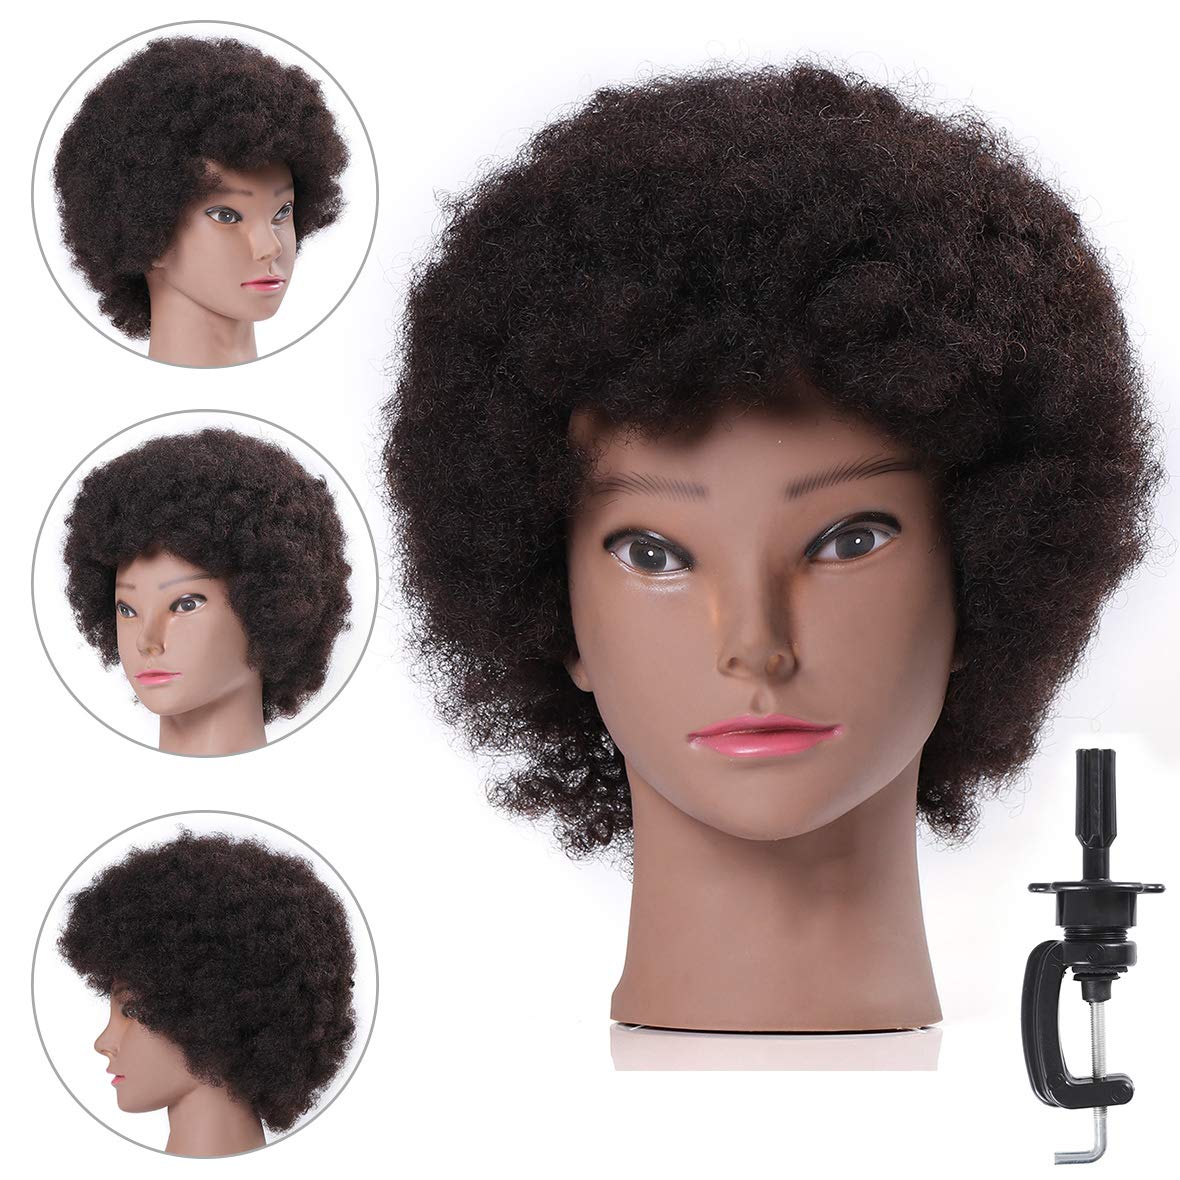 Afro Curly Mannequin Head with 100% Human Hair Curly Hair Hairdresser Hair Styling Cosmetology Manikin Head Doll Head for Hairdresser Practice Styling